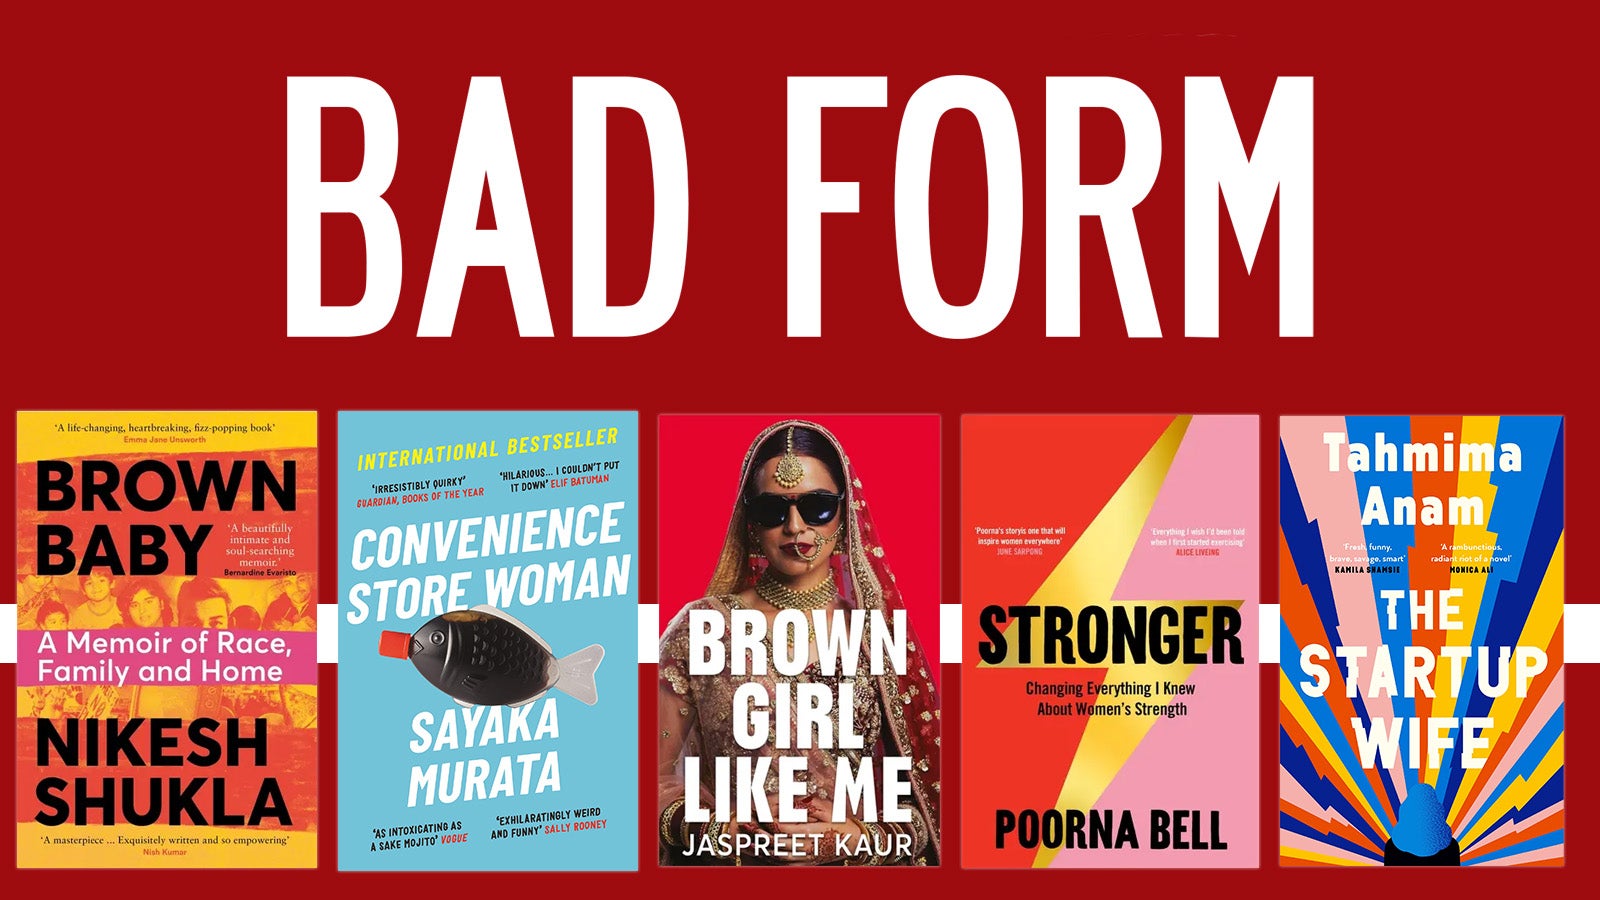 The 'BAD FORM' logo, above five book covers: Brown Baby, Convenience Store Woman, Brown Girl Like Me, Stronger and The Startup Wife